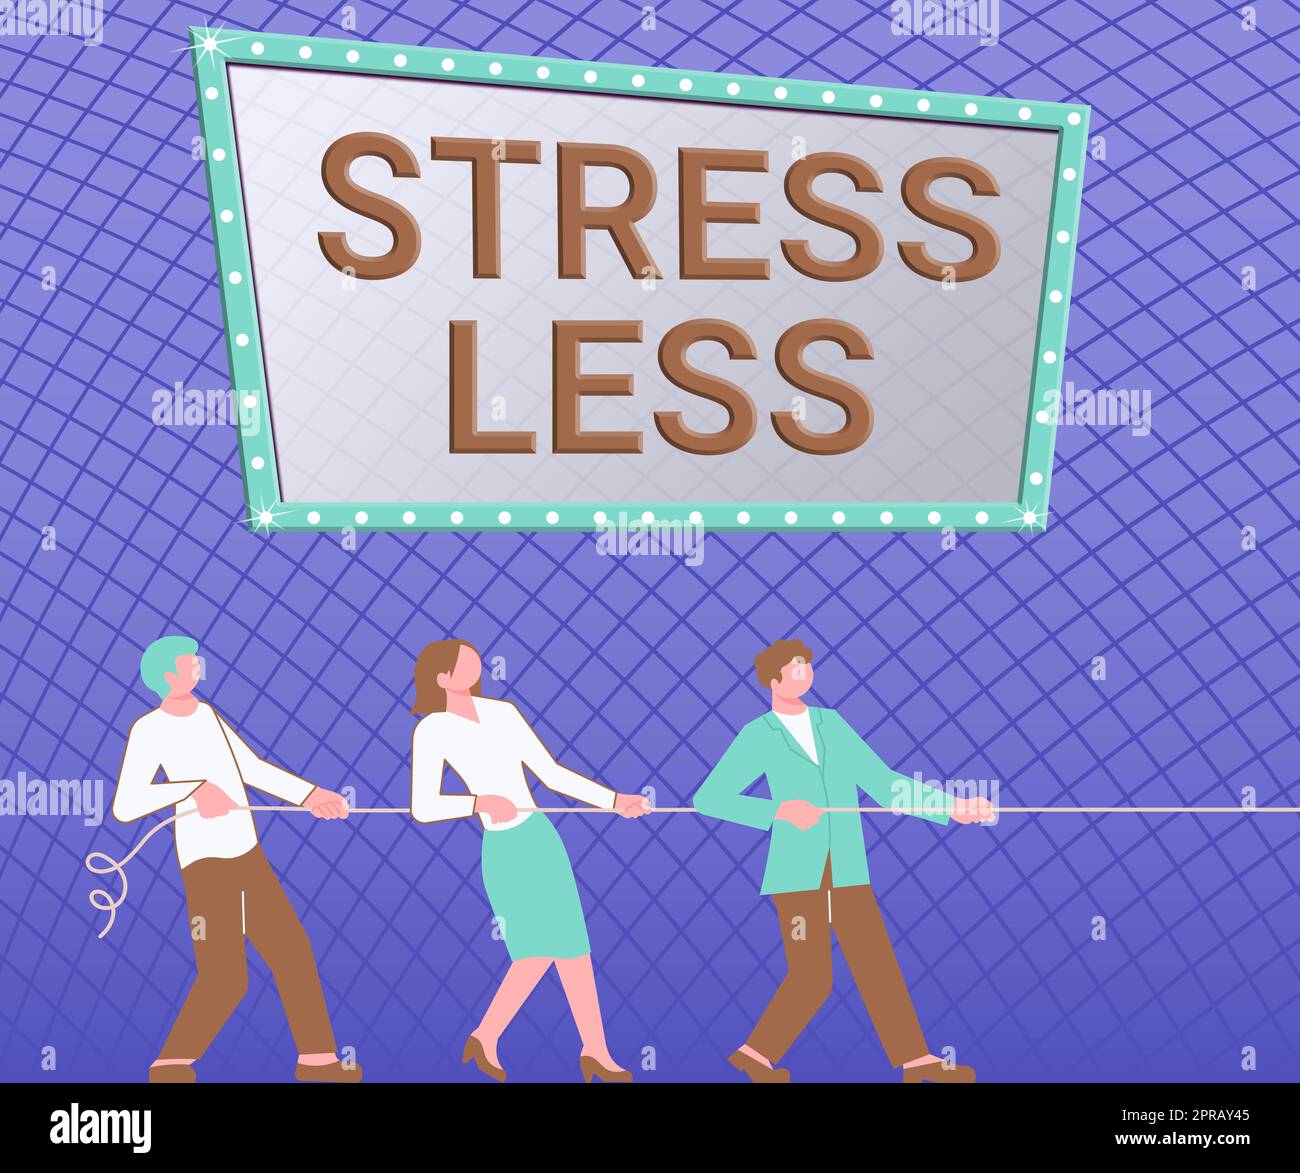 Conceptual display Stress Less. Business idea Stay away from problems Go out Unwind Meditate Indulge Oneself Three Colleagues Pulling Rope Together Presenting Teamwork Success Plans. Stock Photo